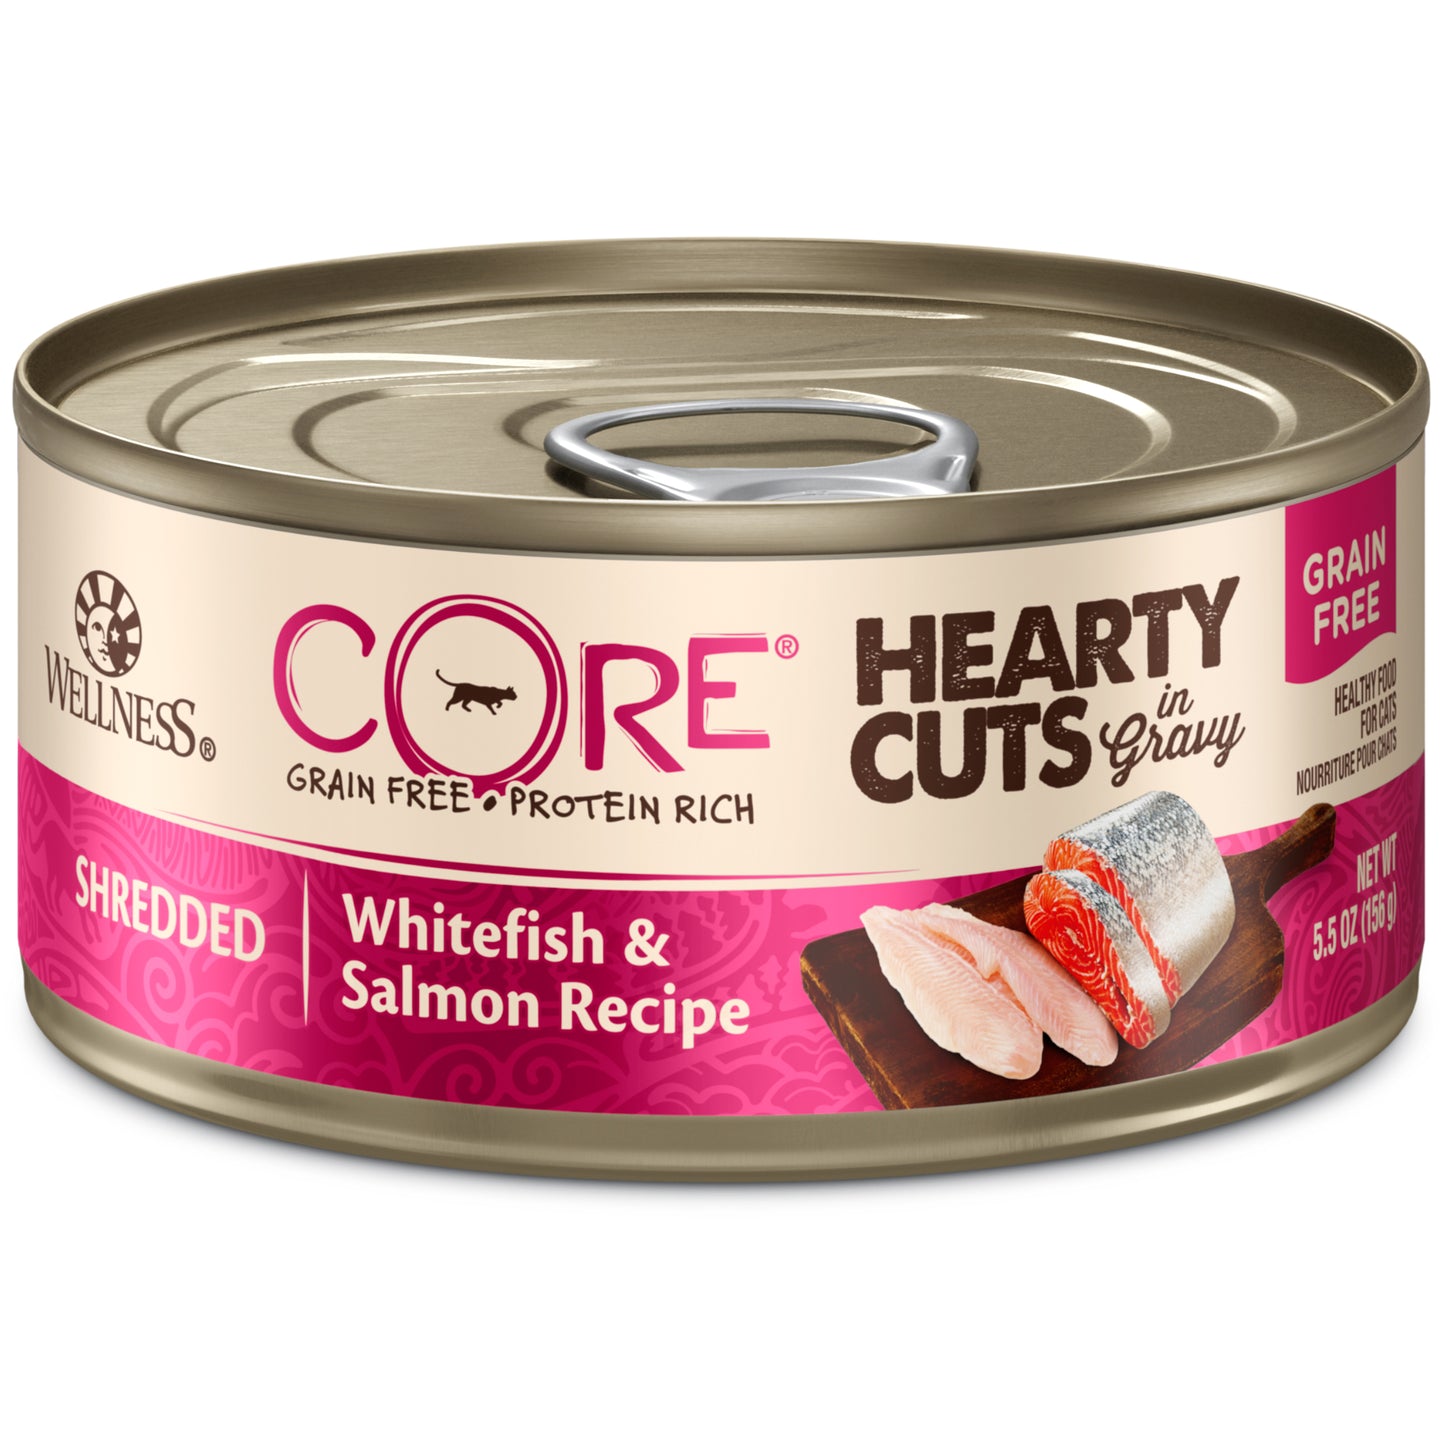 Wellness CORE Hearty Cuts Natural Grain Free Wet Canned Cat Food Whitefish & Salmon 5.5oz Can